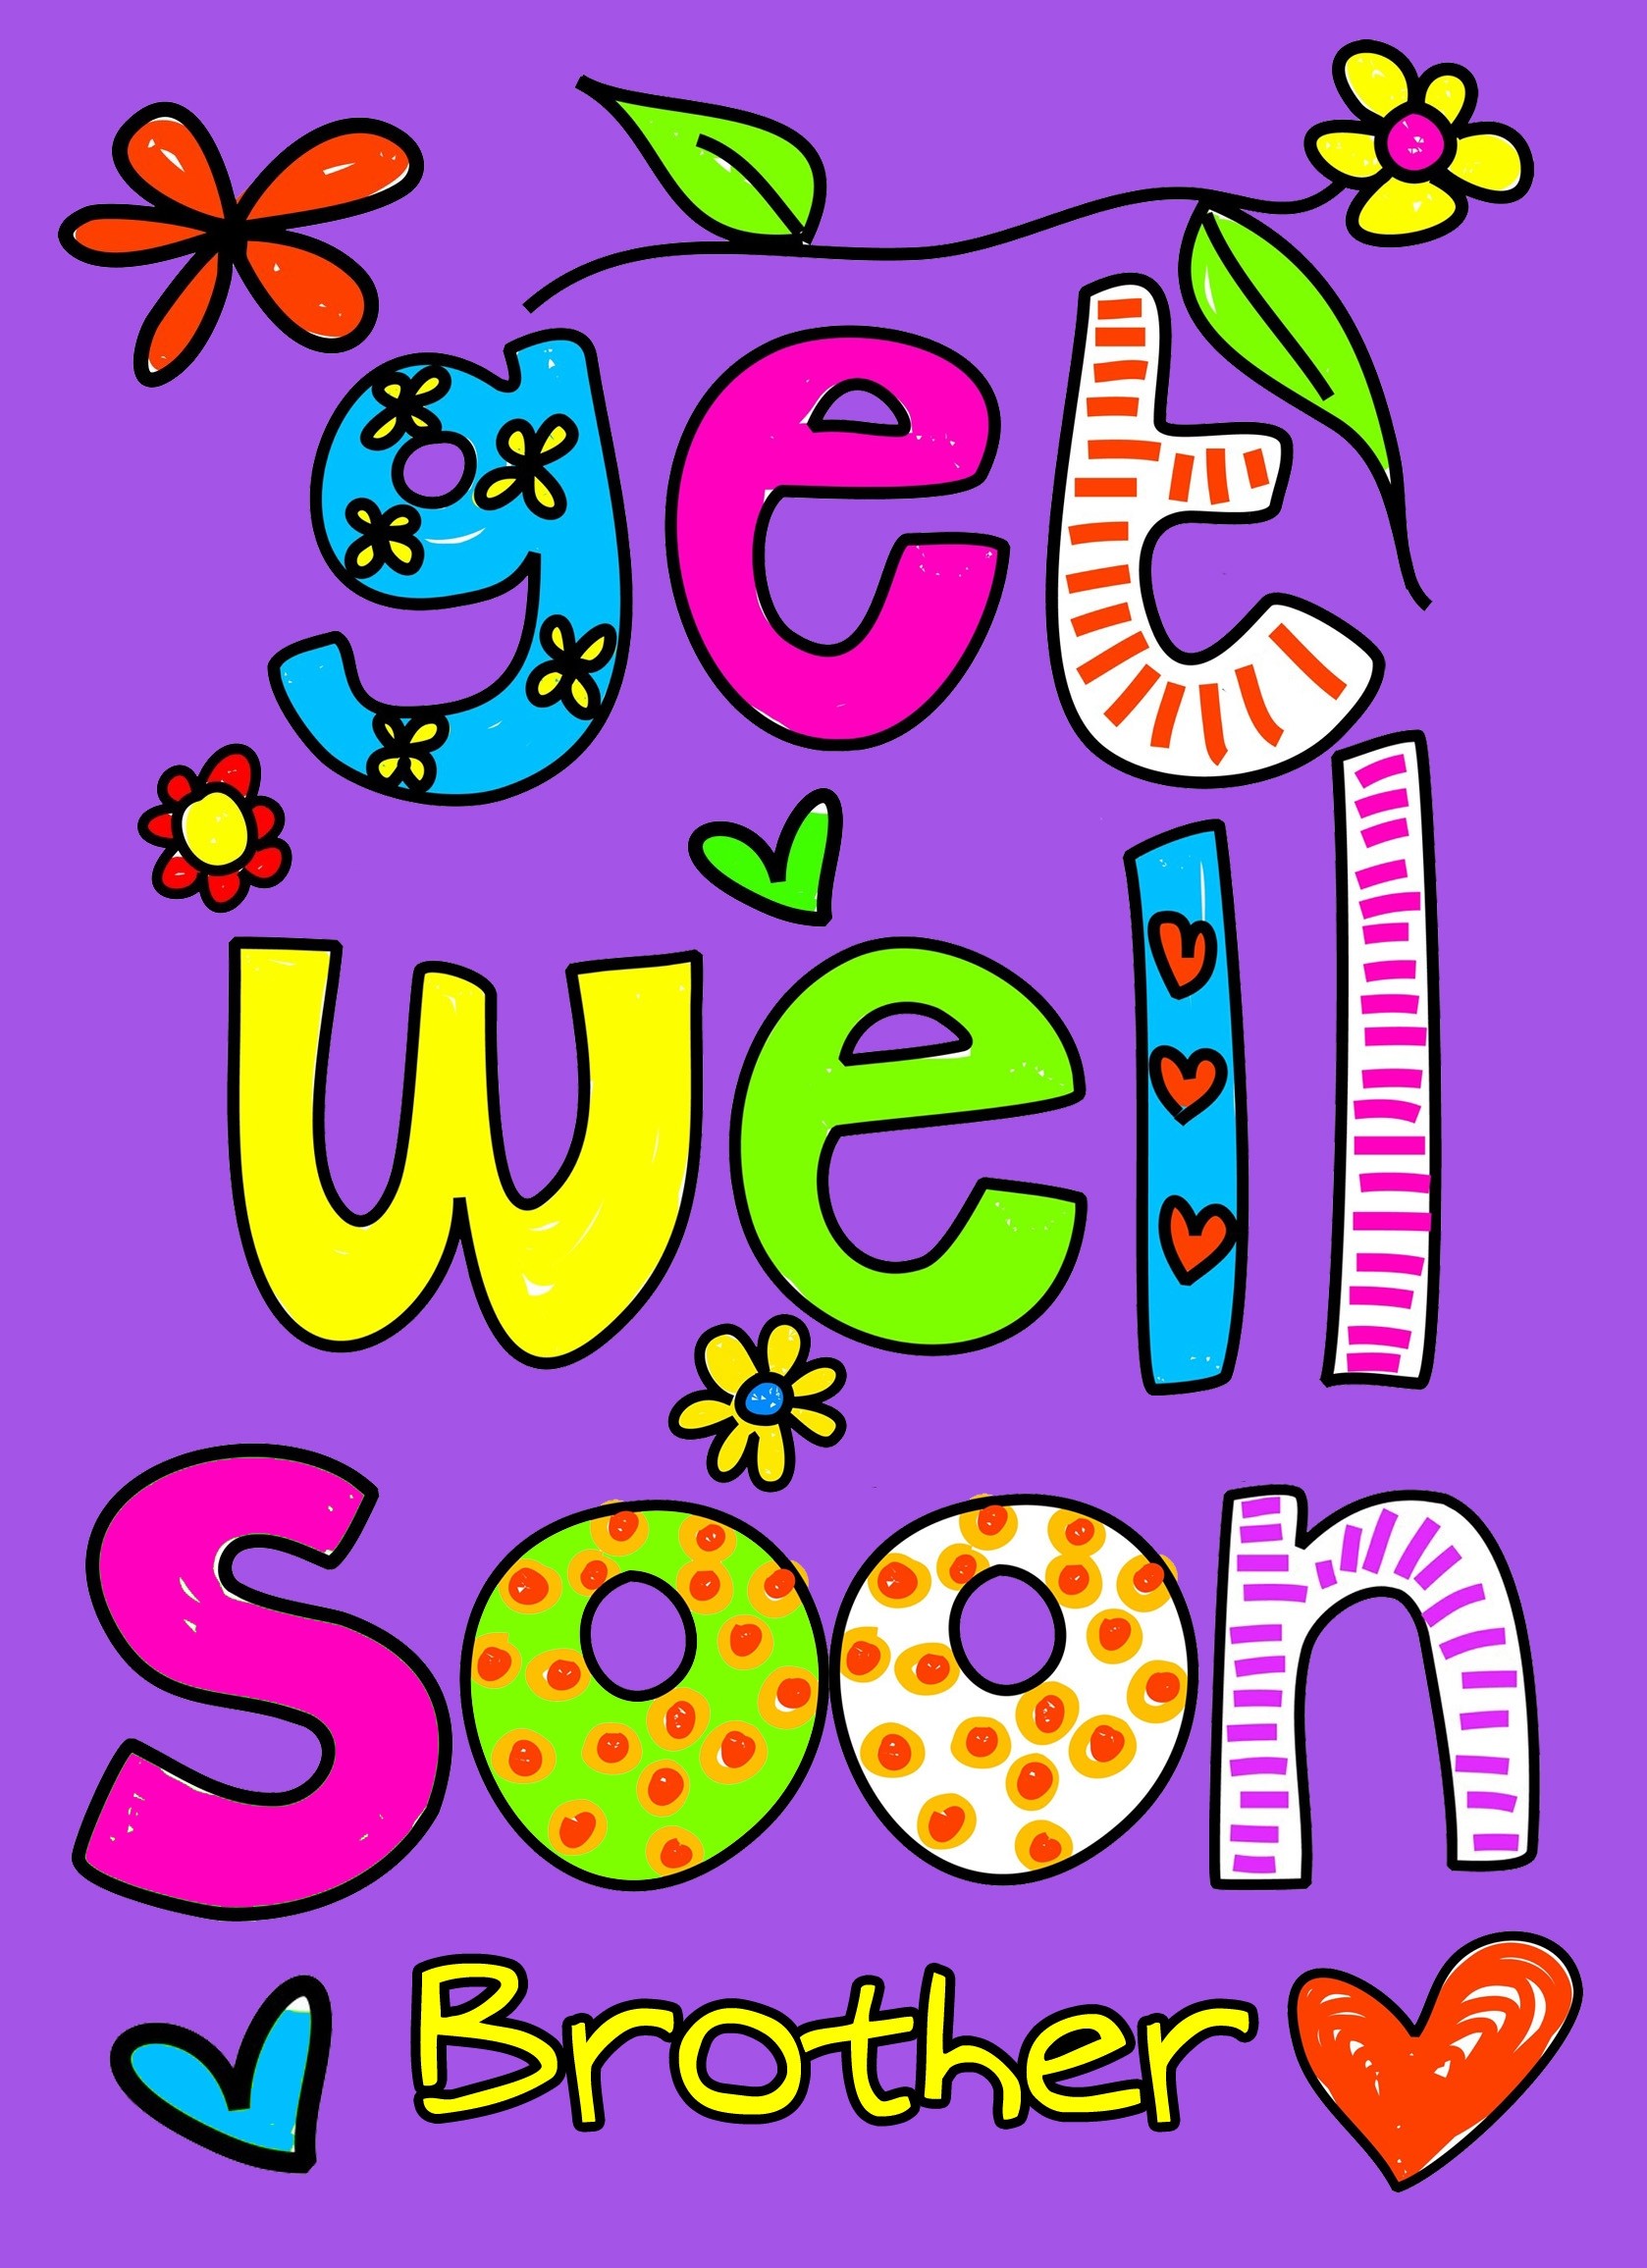 Get Well Soon 'Brother' Greeting Card